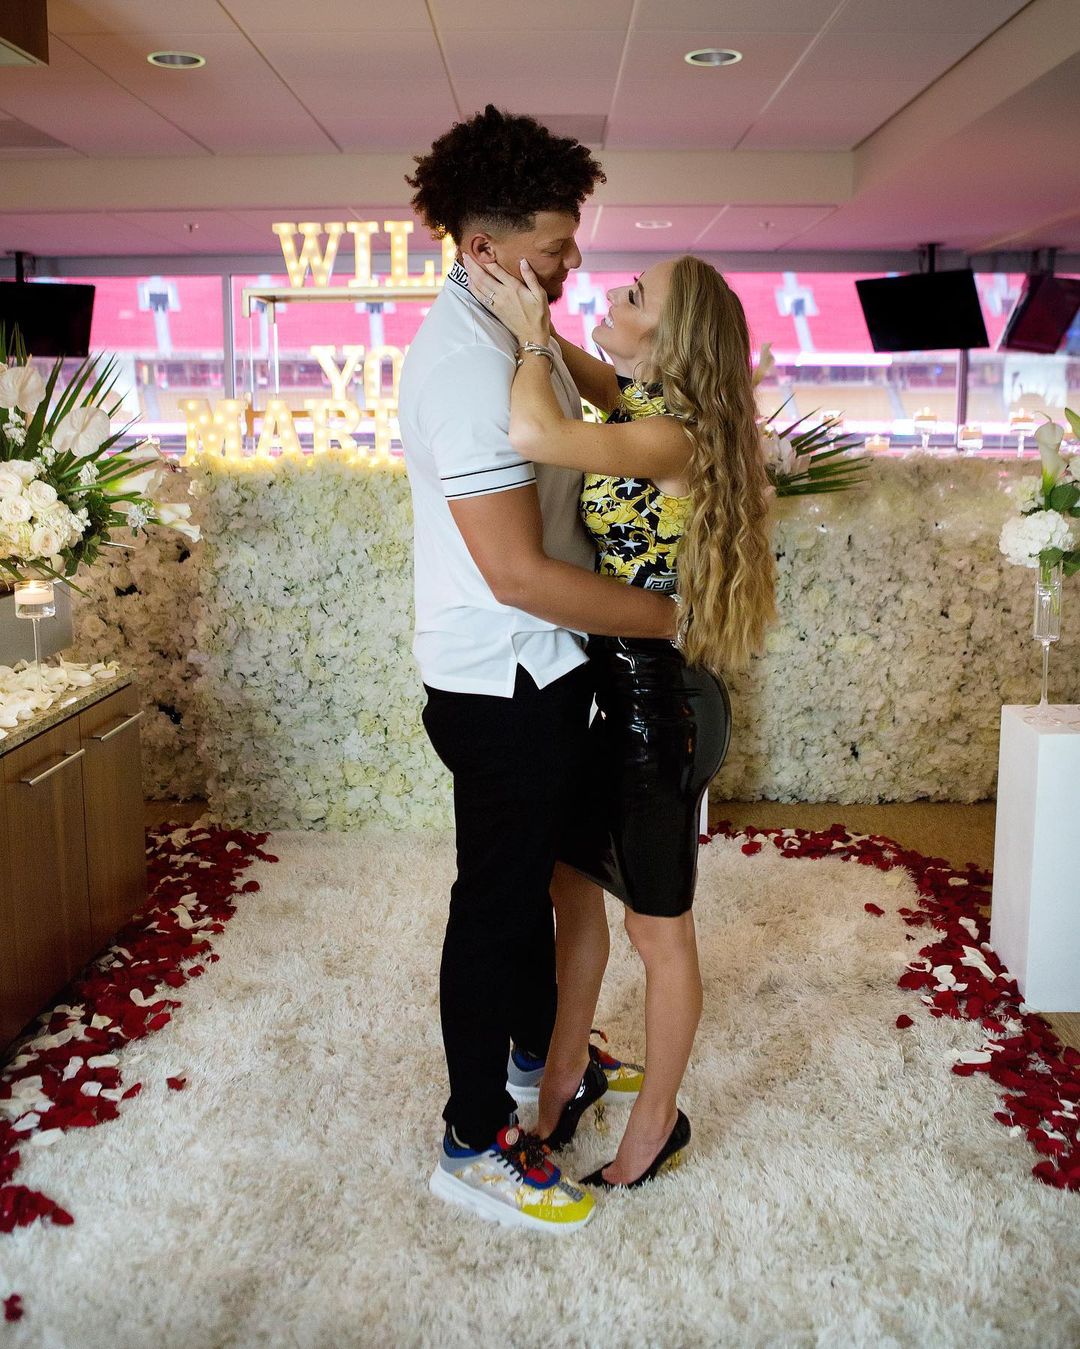 Mahomes shares the home with his high-school sweetheart fiancee Brittany Matthews